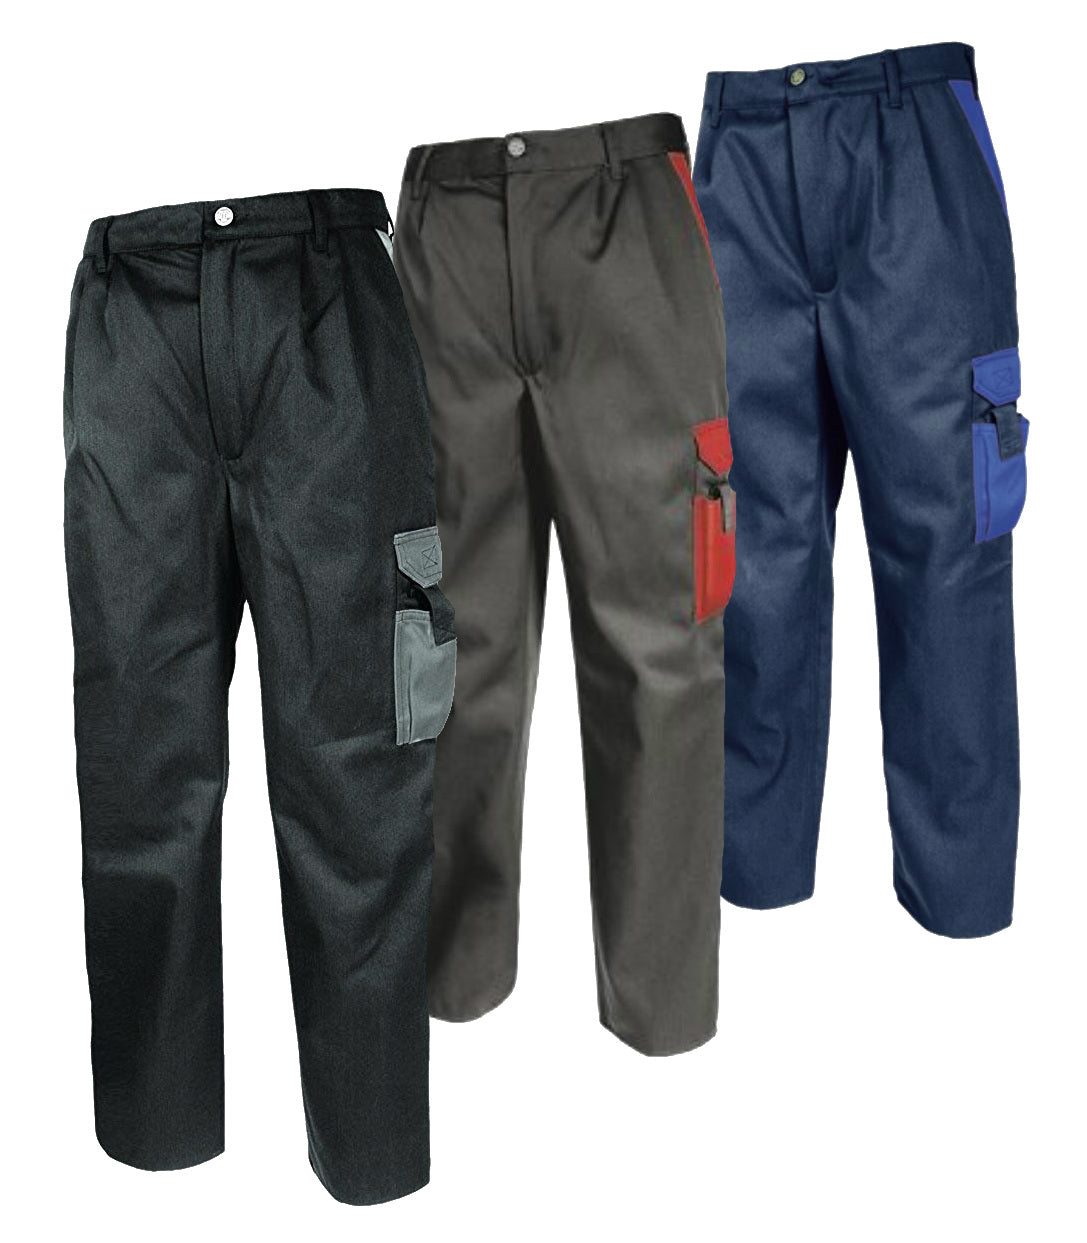 Tranemo 2940 50 Craftsman Cargo Trousers, Triple Stitched Polycotton Work Trousers